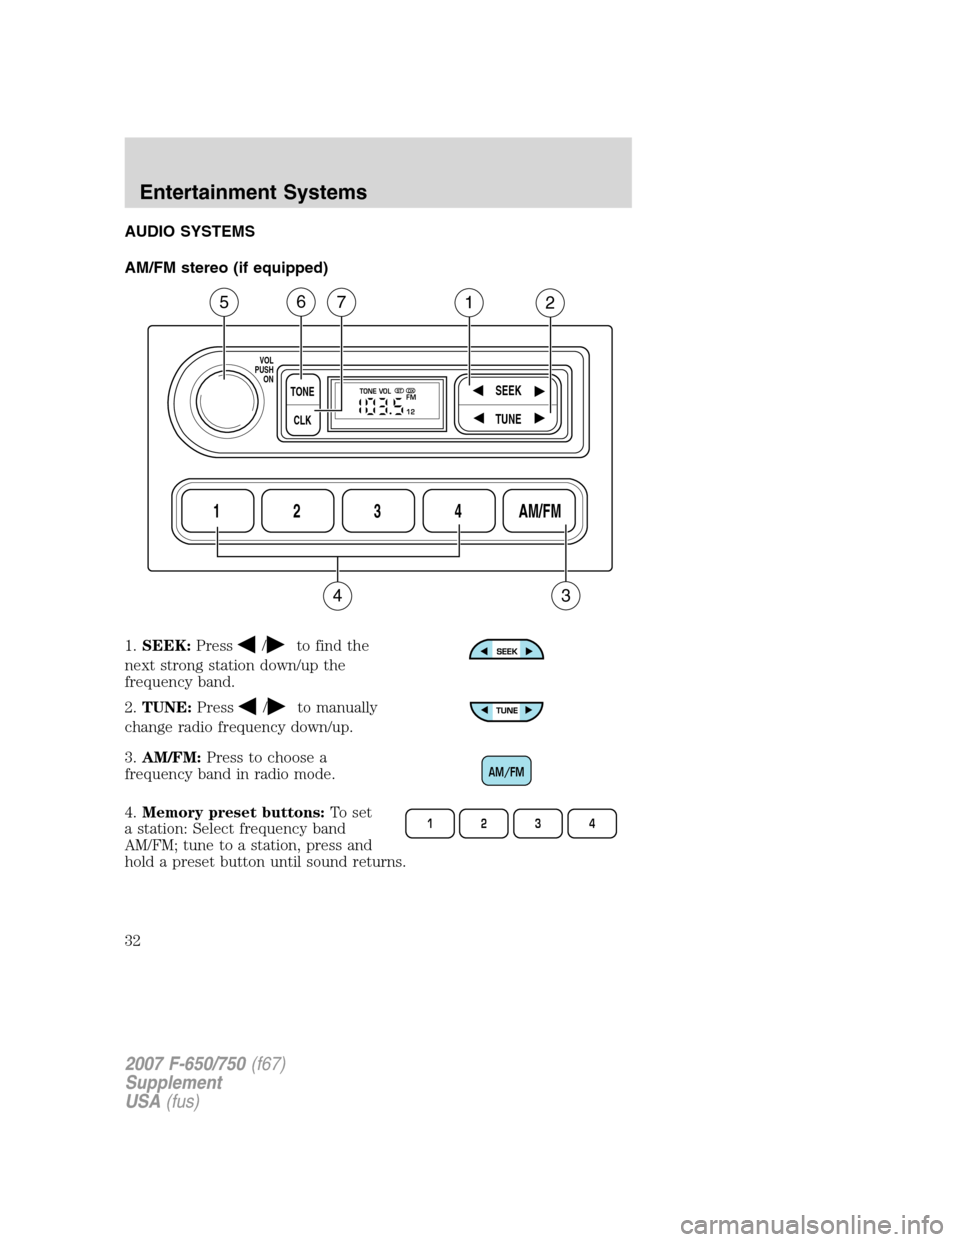 FORD F750 2007 11.G Owners Manual AUDIO SYSTEMS
AM/FM stereo (if equipped)
1.SEEK:Press
/to find the
next strong station down/up the
frequency band.
2.TUNE:Press
/to manually
change radio frequency down/up.
3.AM/FM:Press to choose a
f